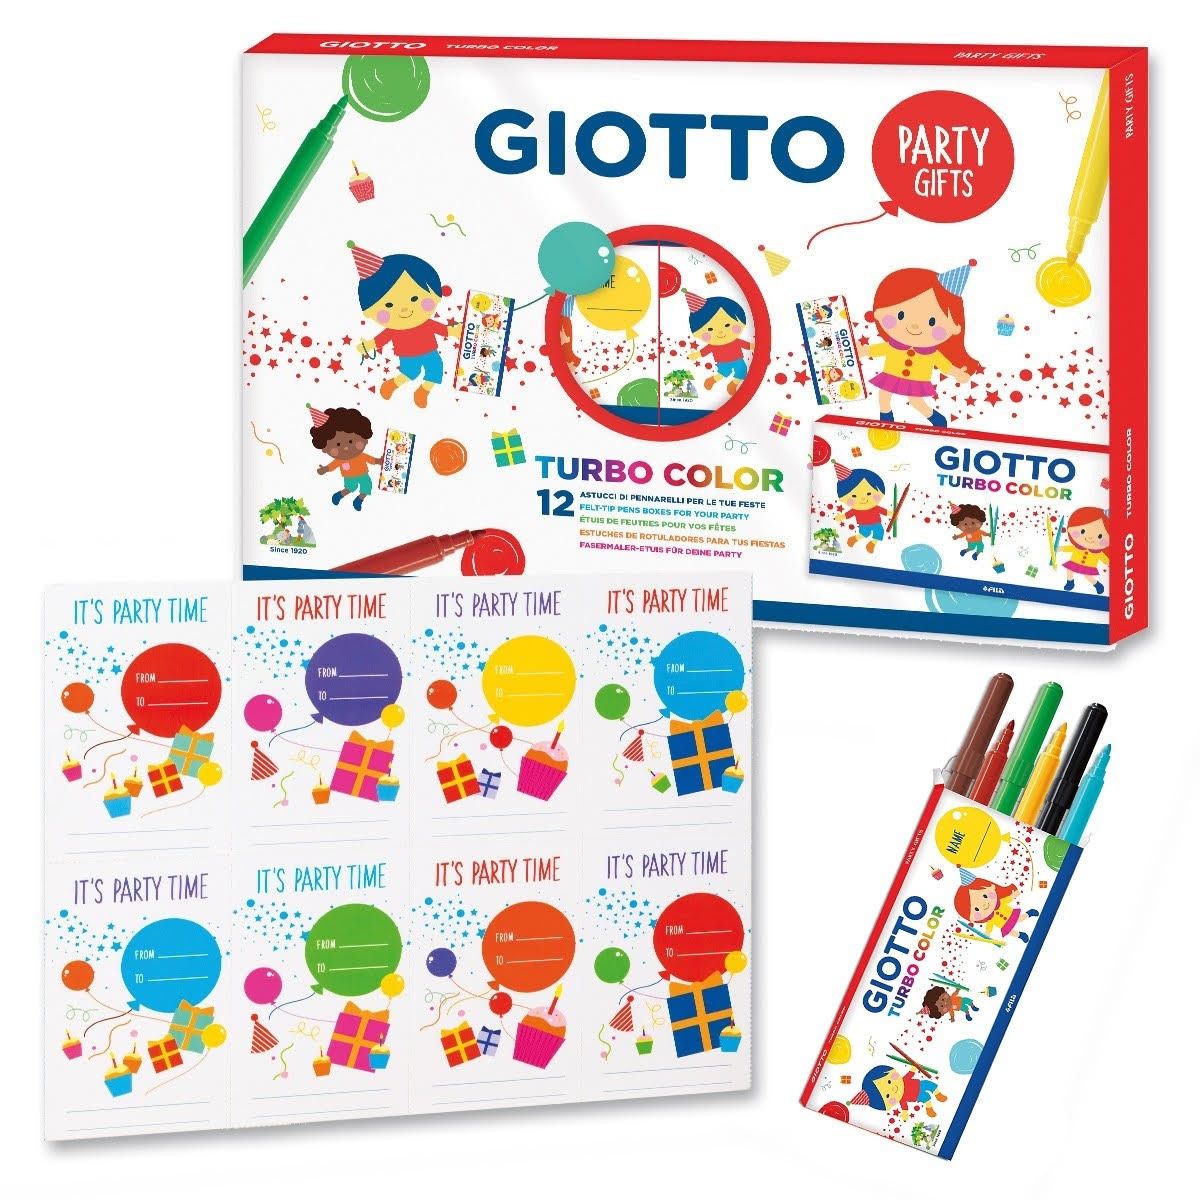 Giotto Party Gifts Turbo Color